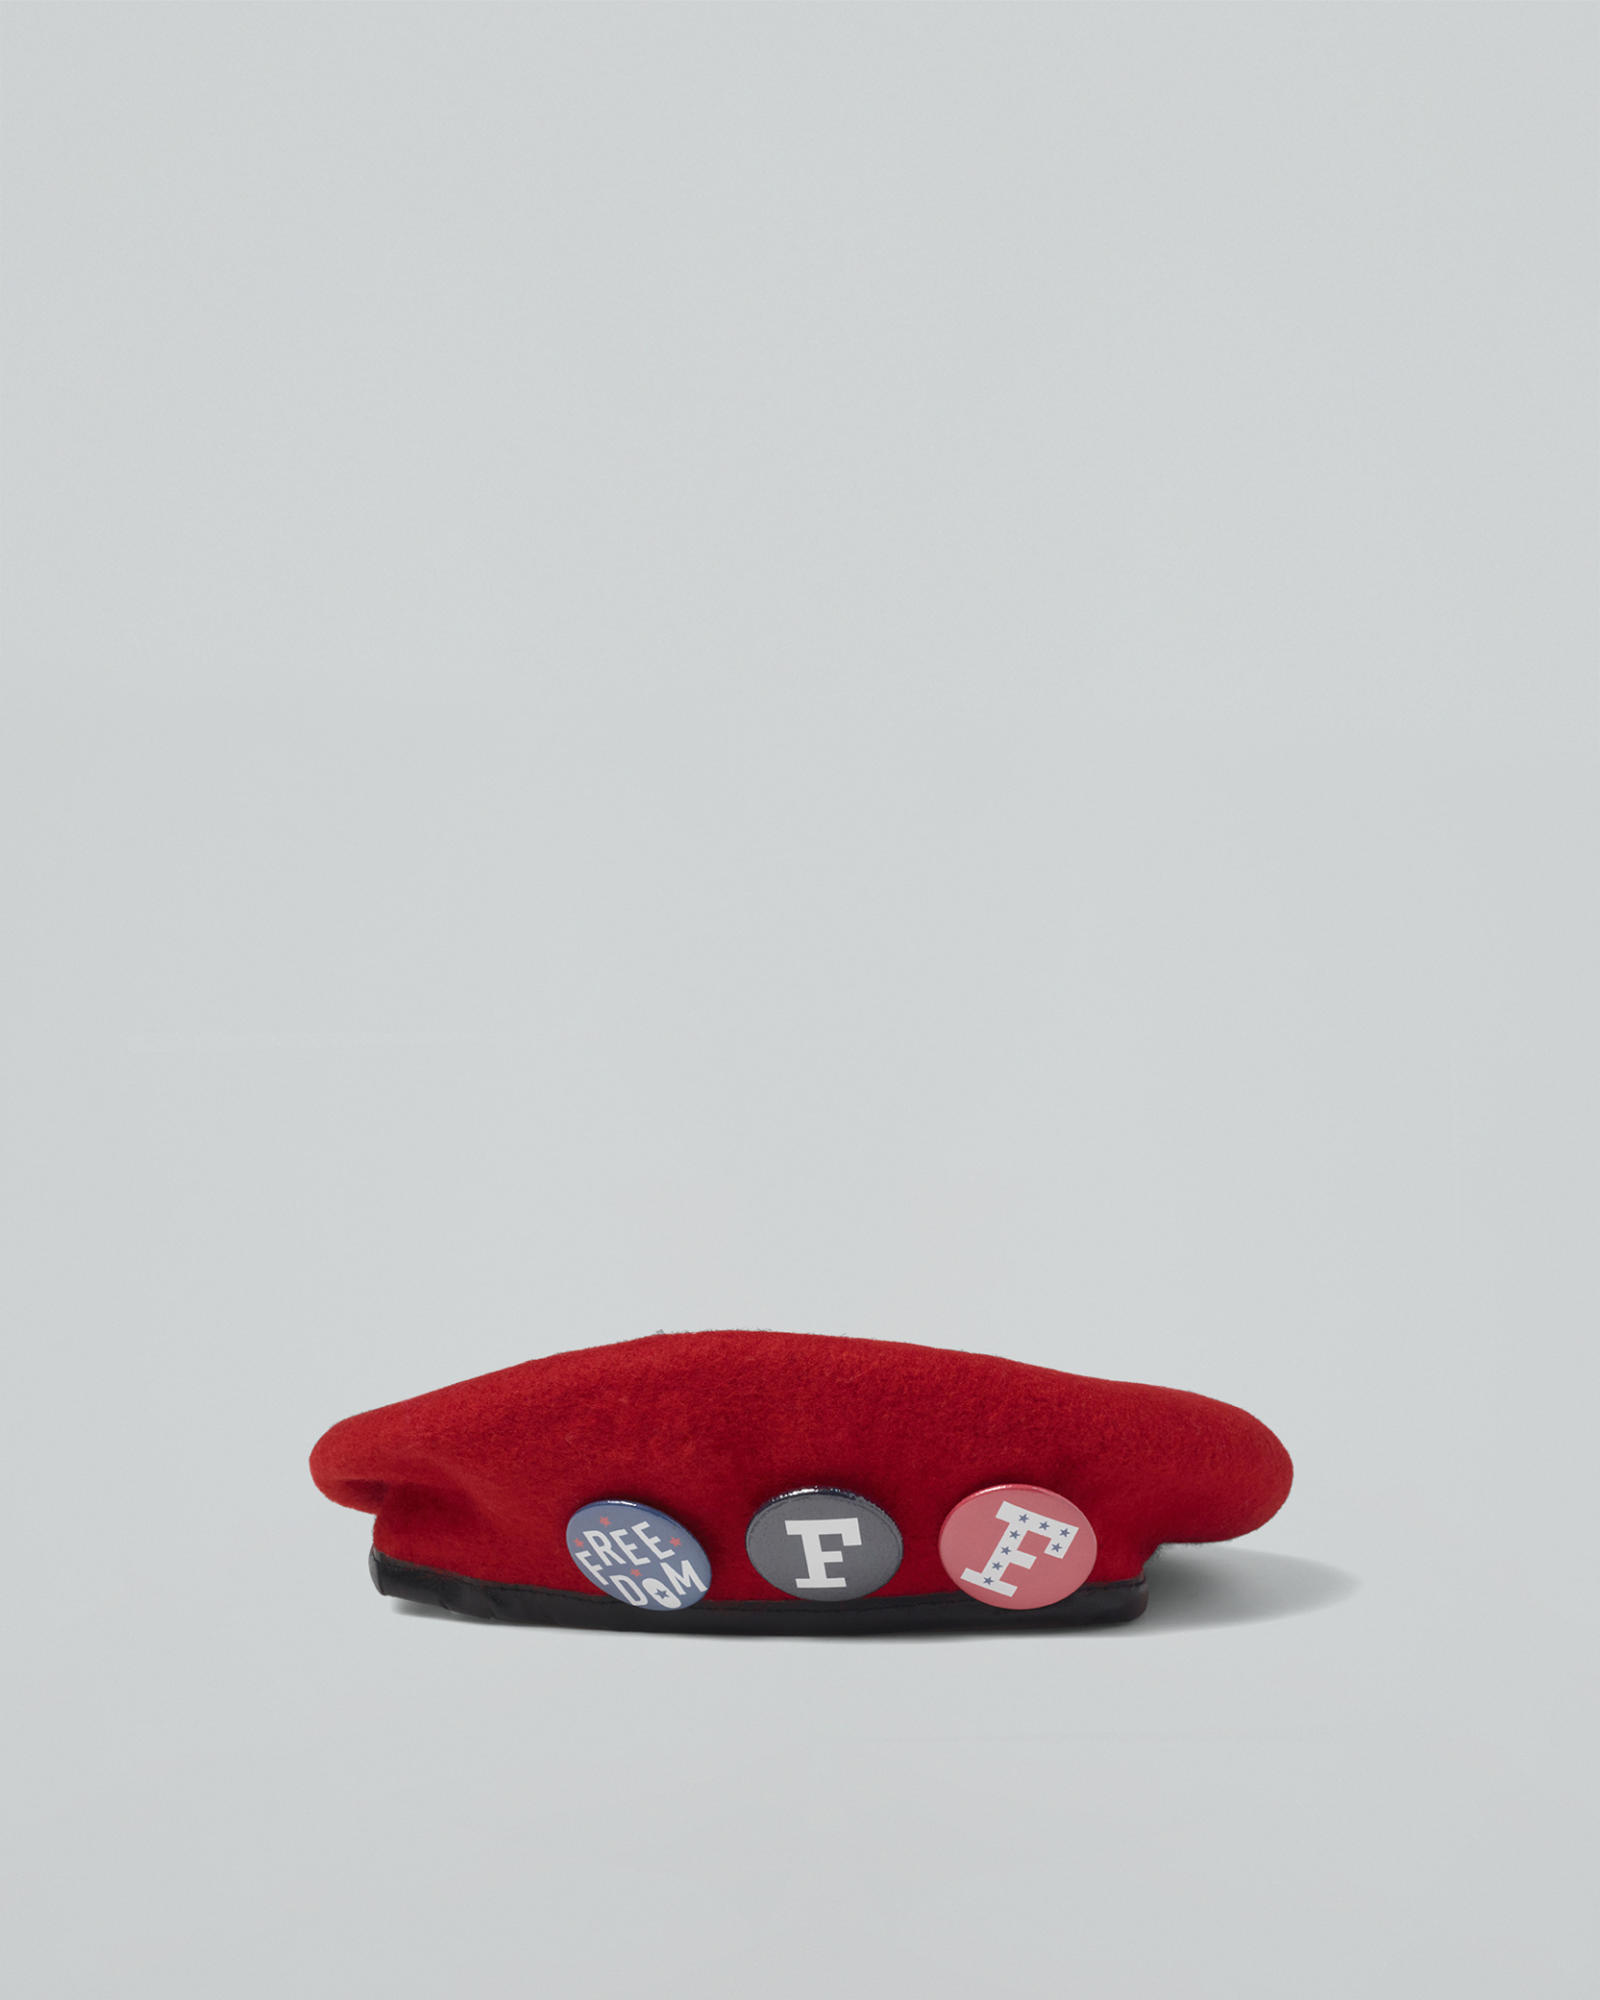 Beret-Customized-with-Pins-1